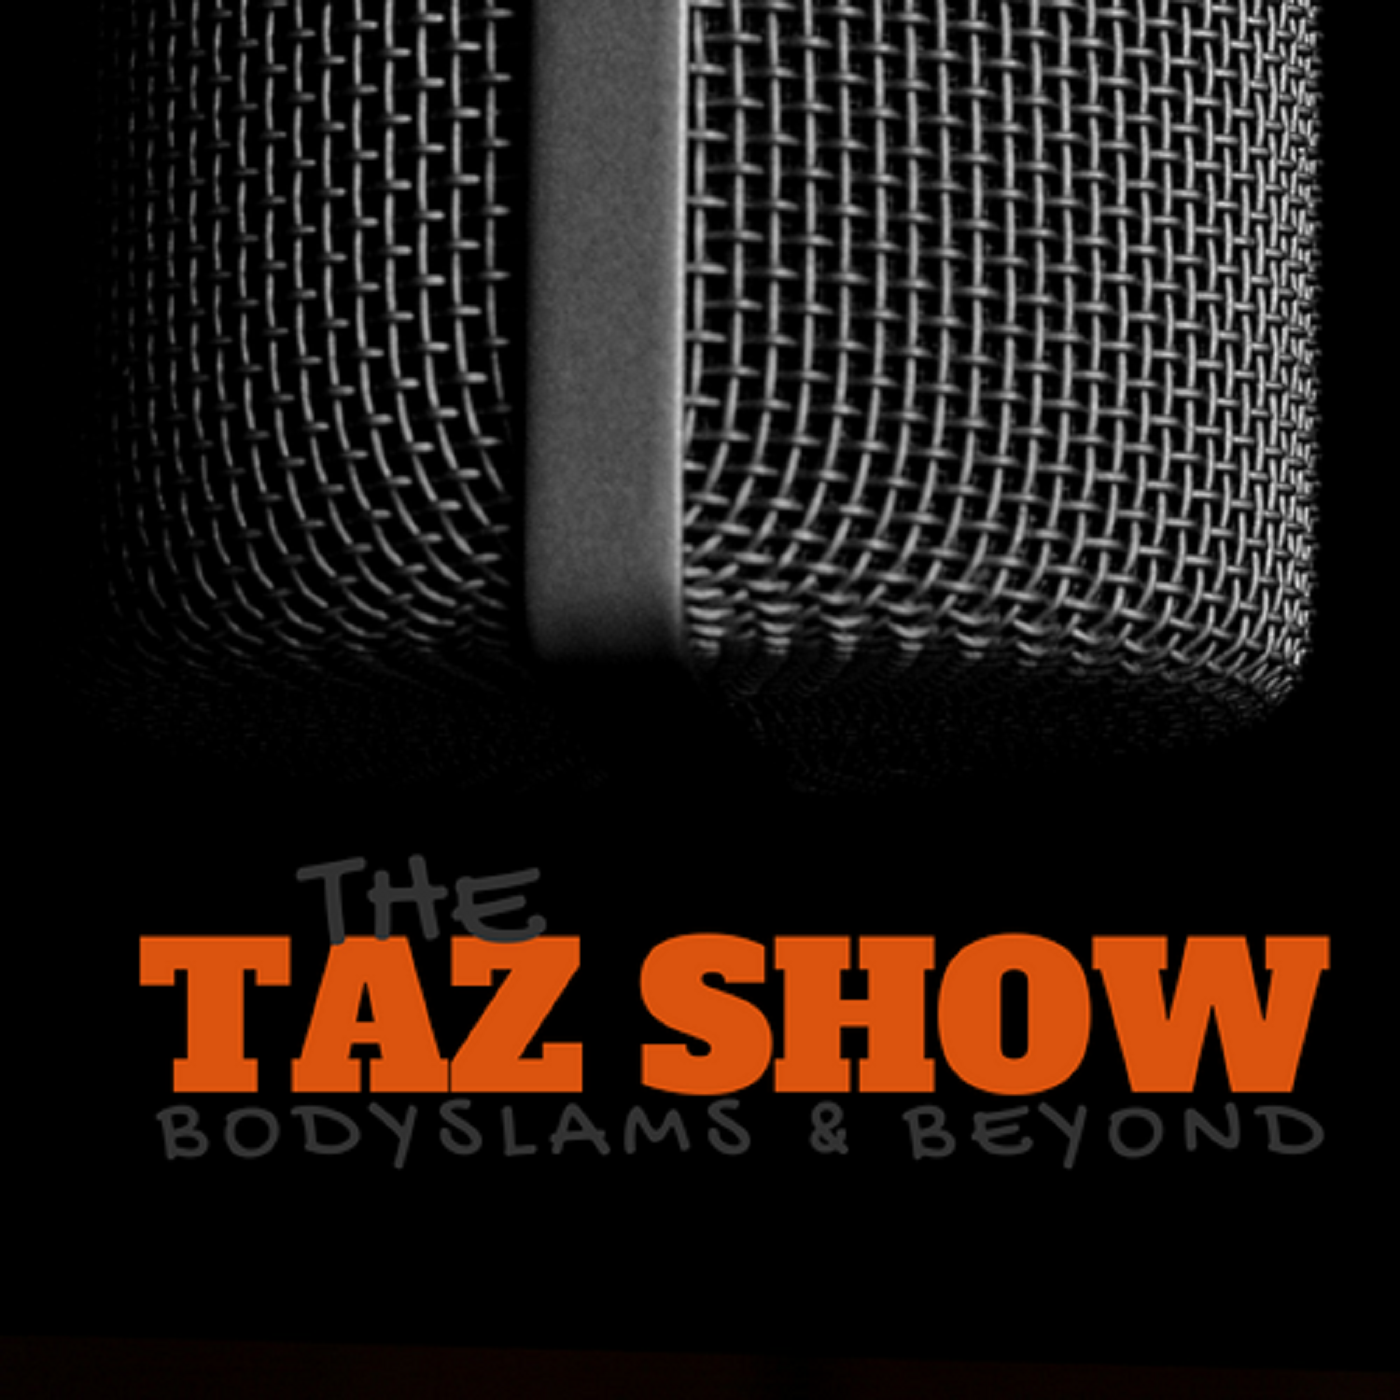 Taz Show Hump Day Promos!